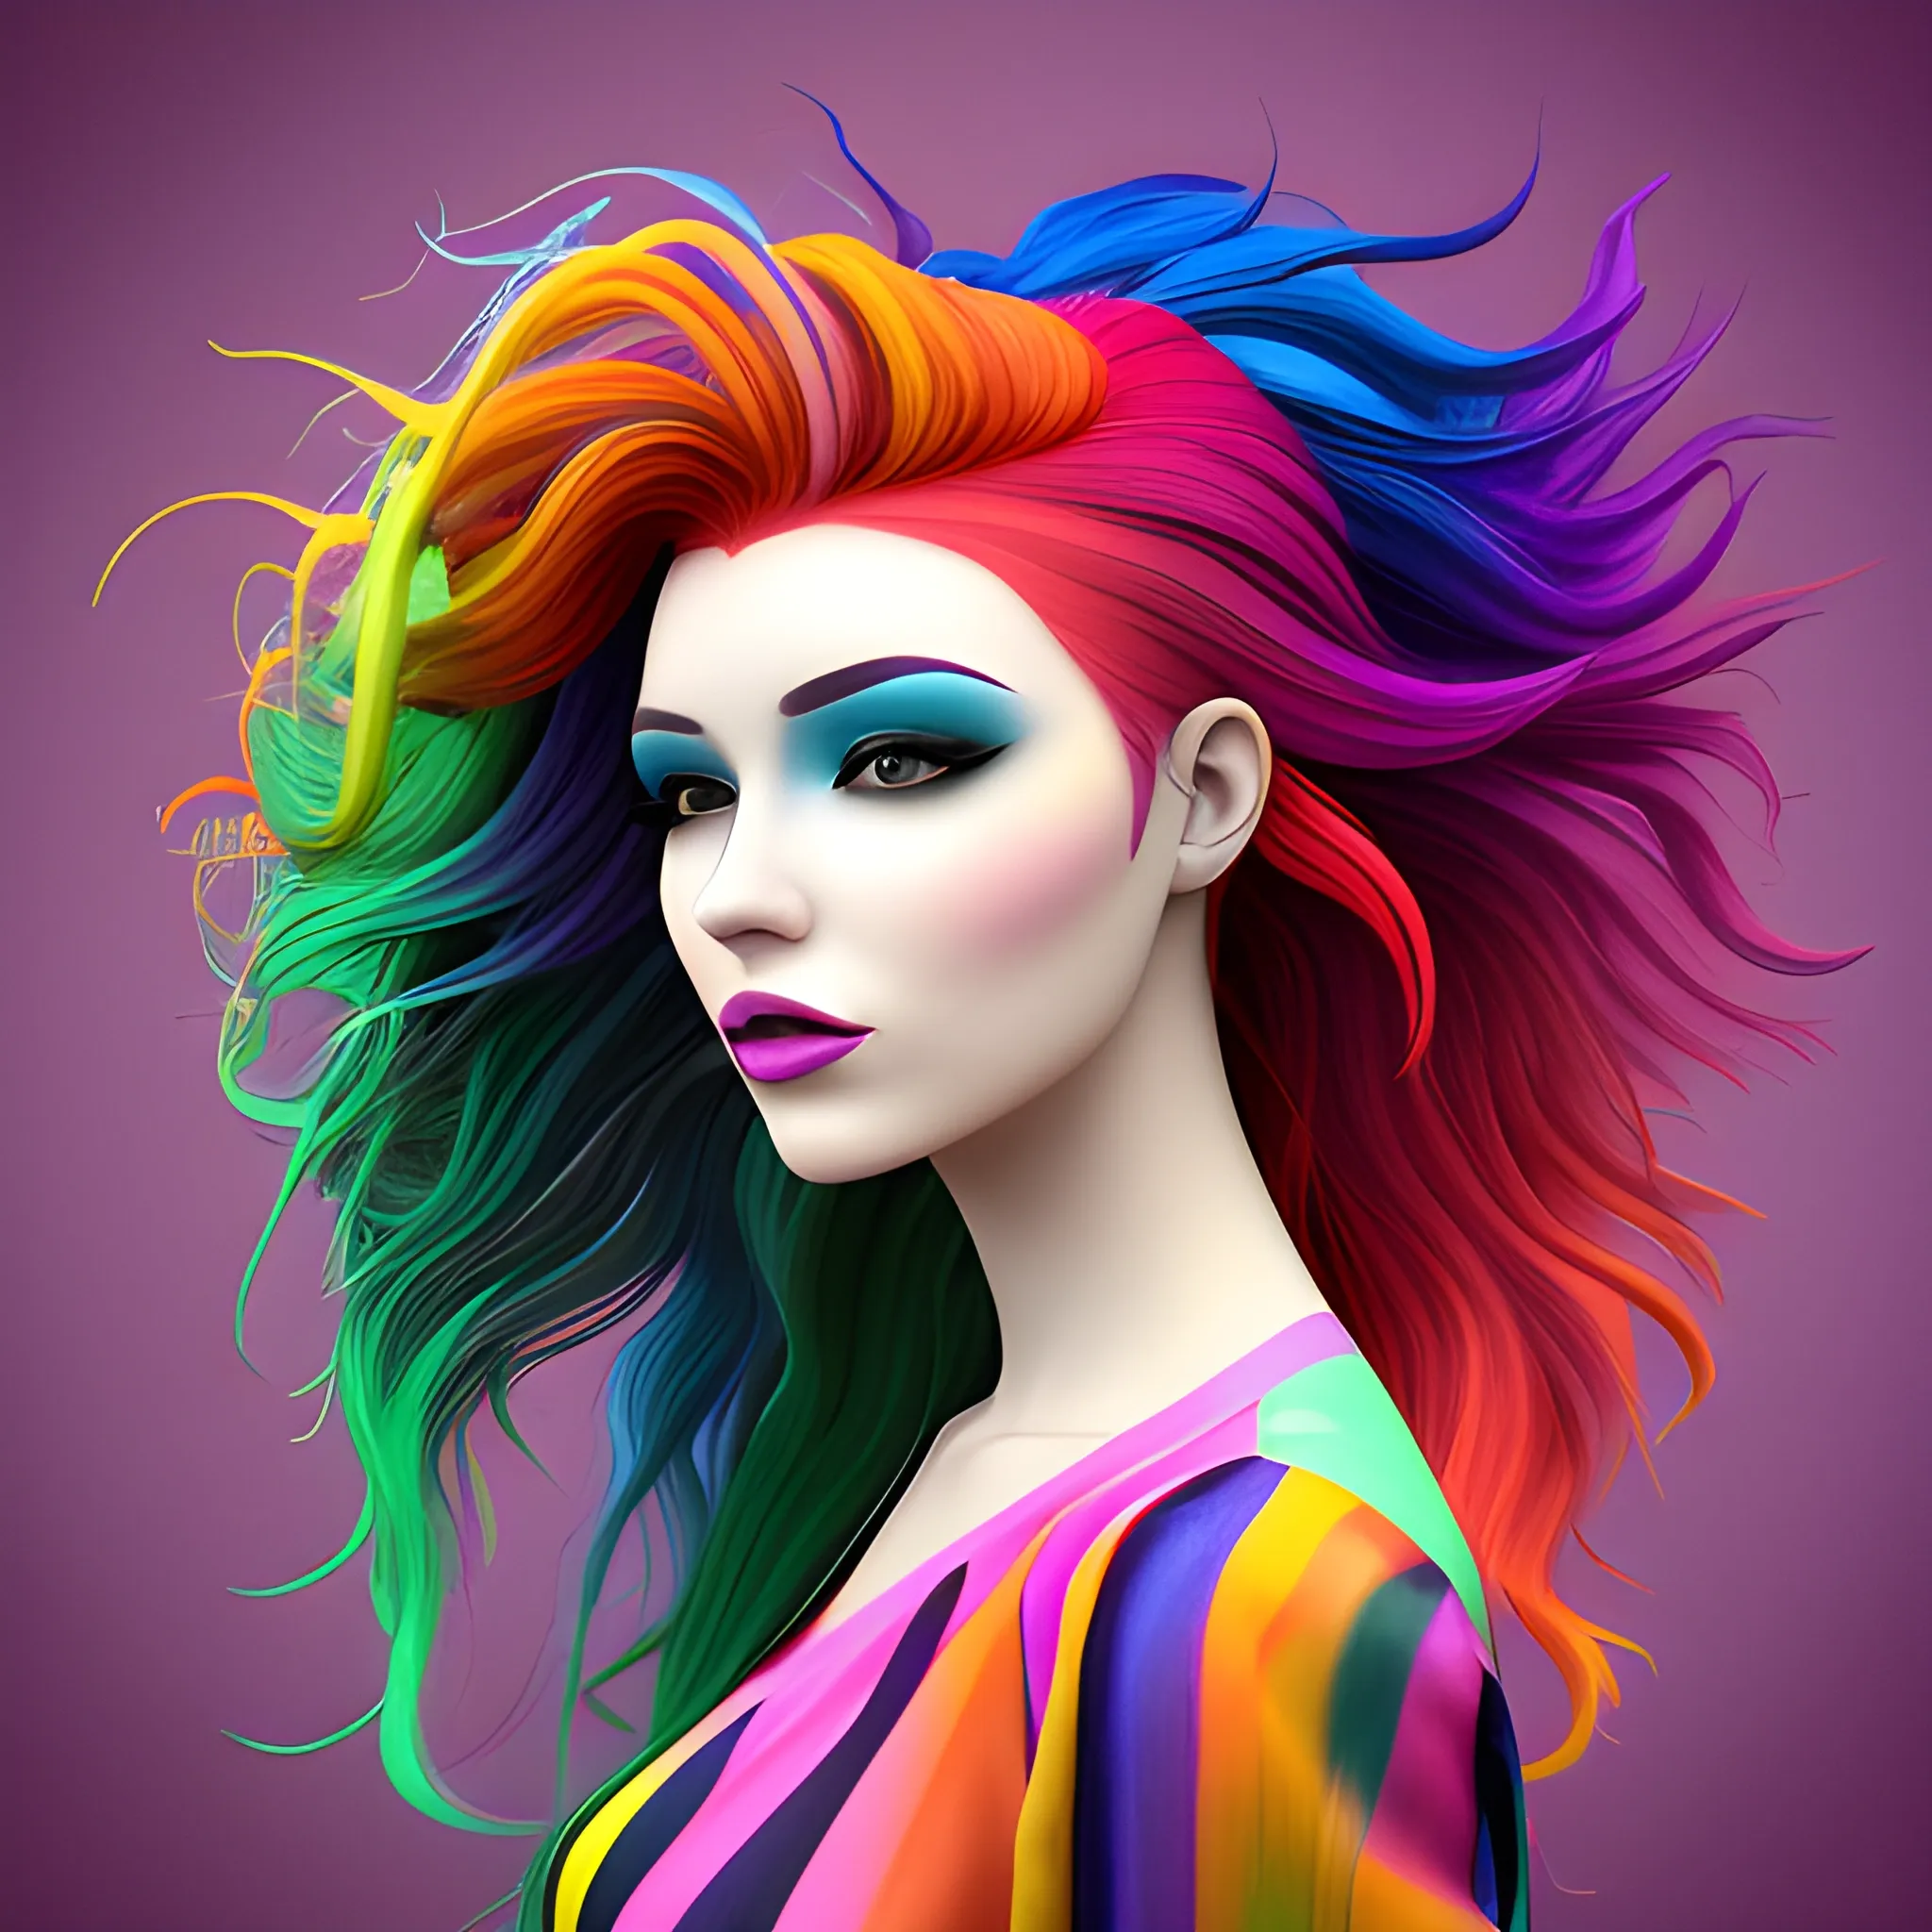 the woman is wearing multicolored hair, vibrant color scheme, 3D ...